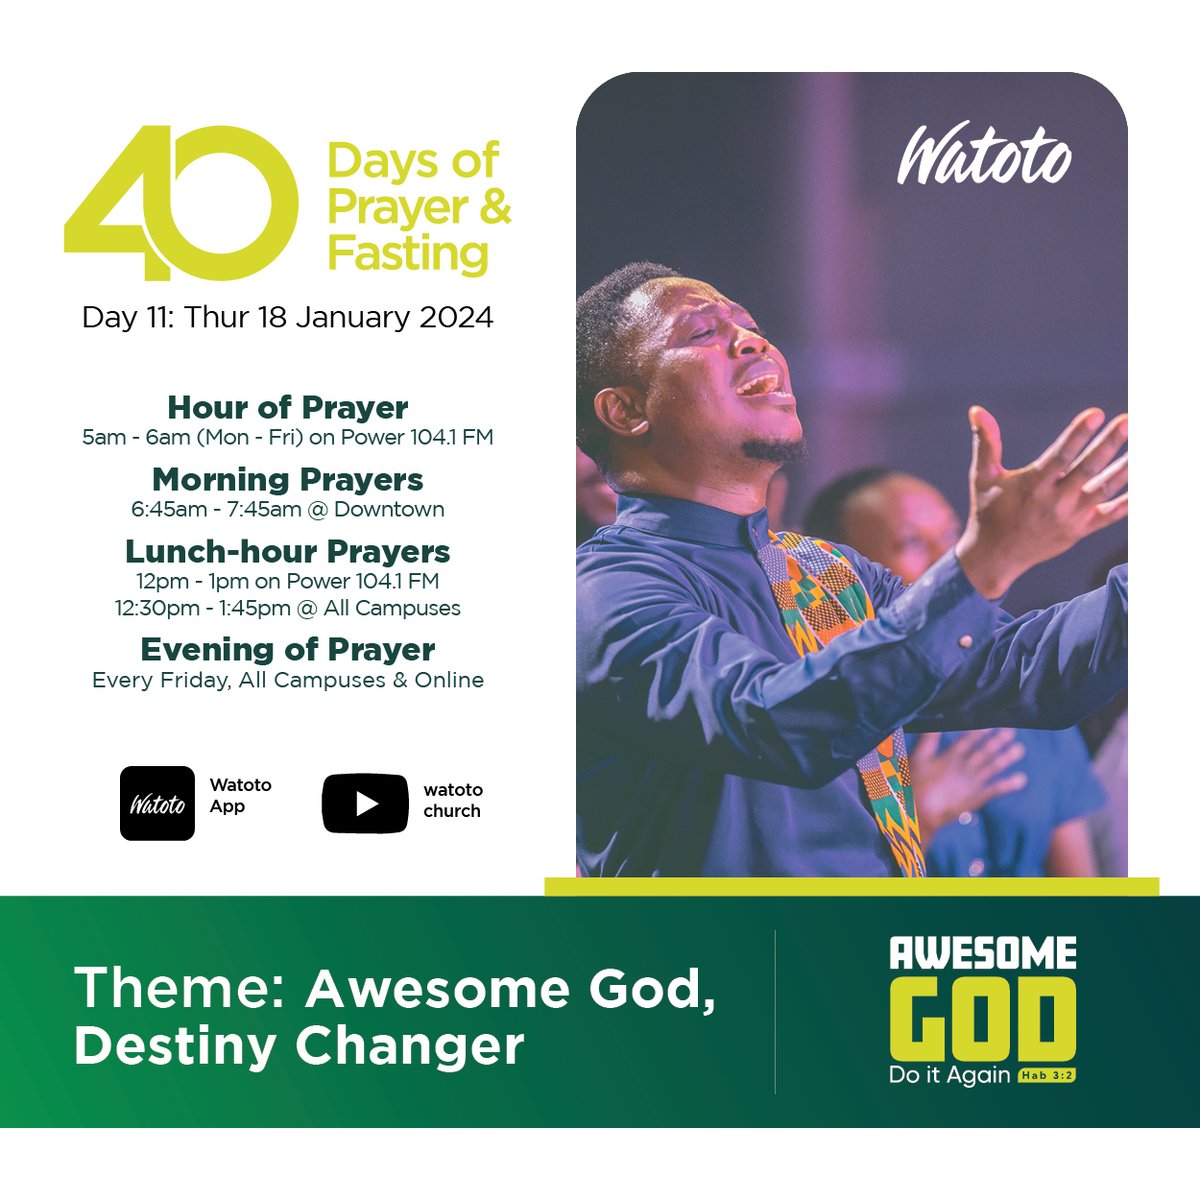 The awesome God can change your destiny and accomplish something significant with your life for the glory of His name. Will you call on God, the destiny changer today? See the prayer guide at watotochurch.com/40days.pdf. #AwesomeGod #Watoto40